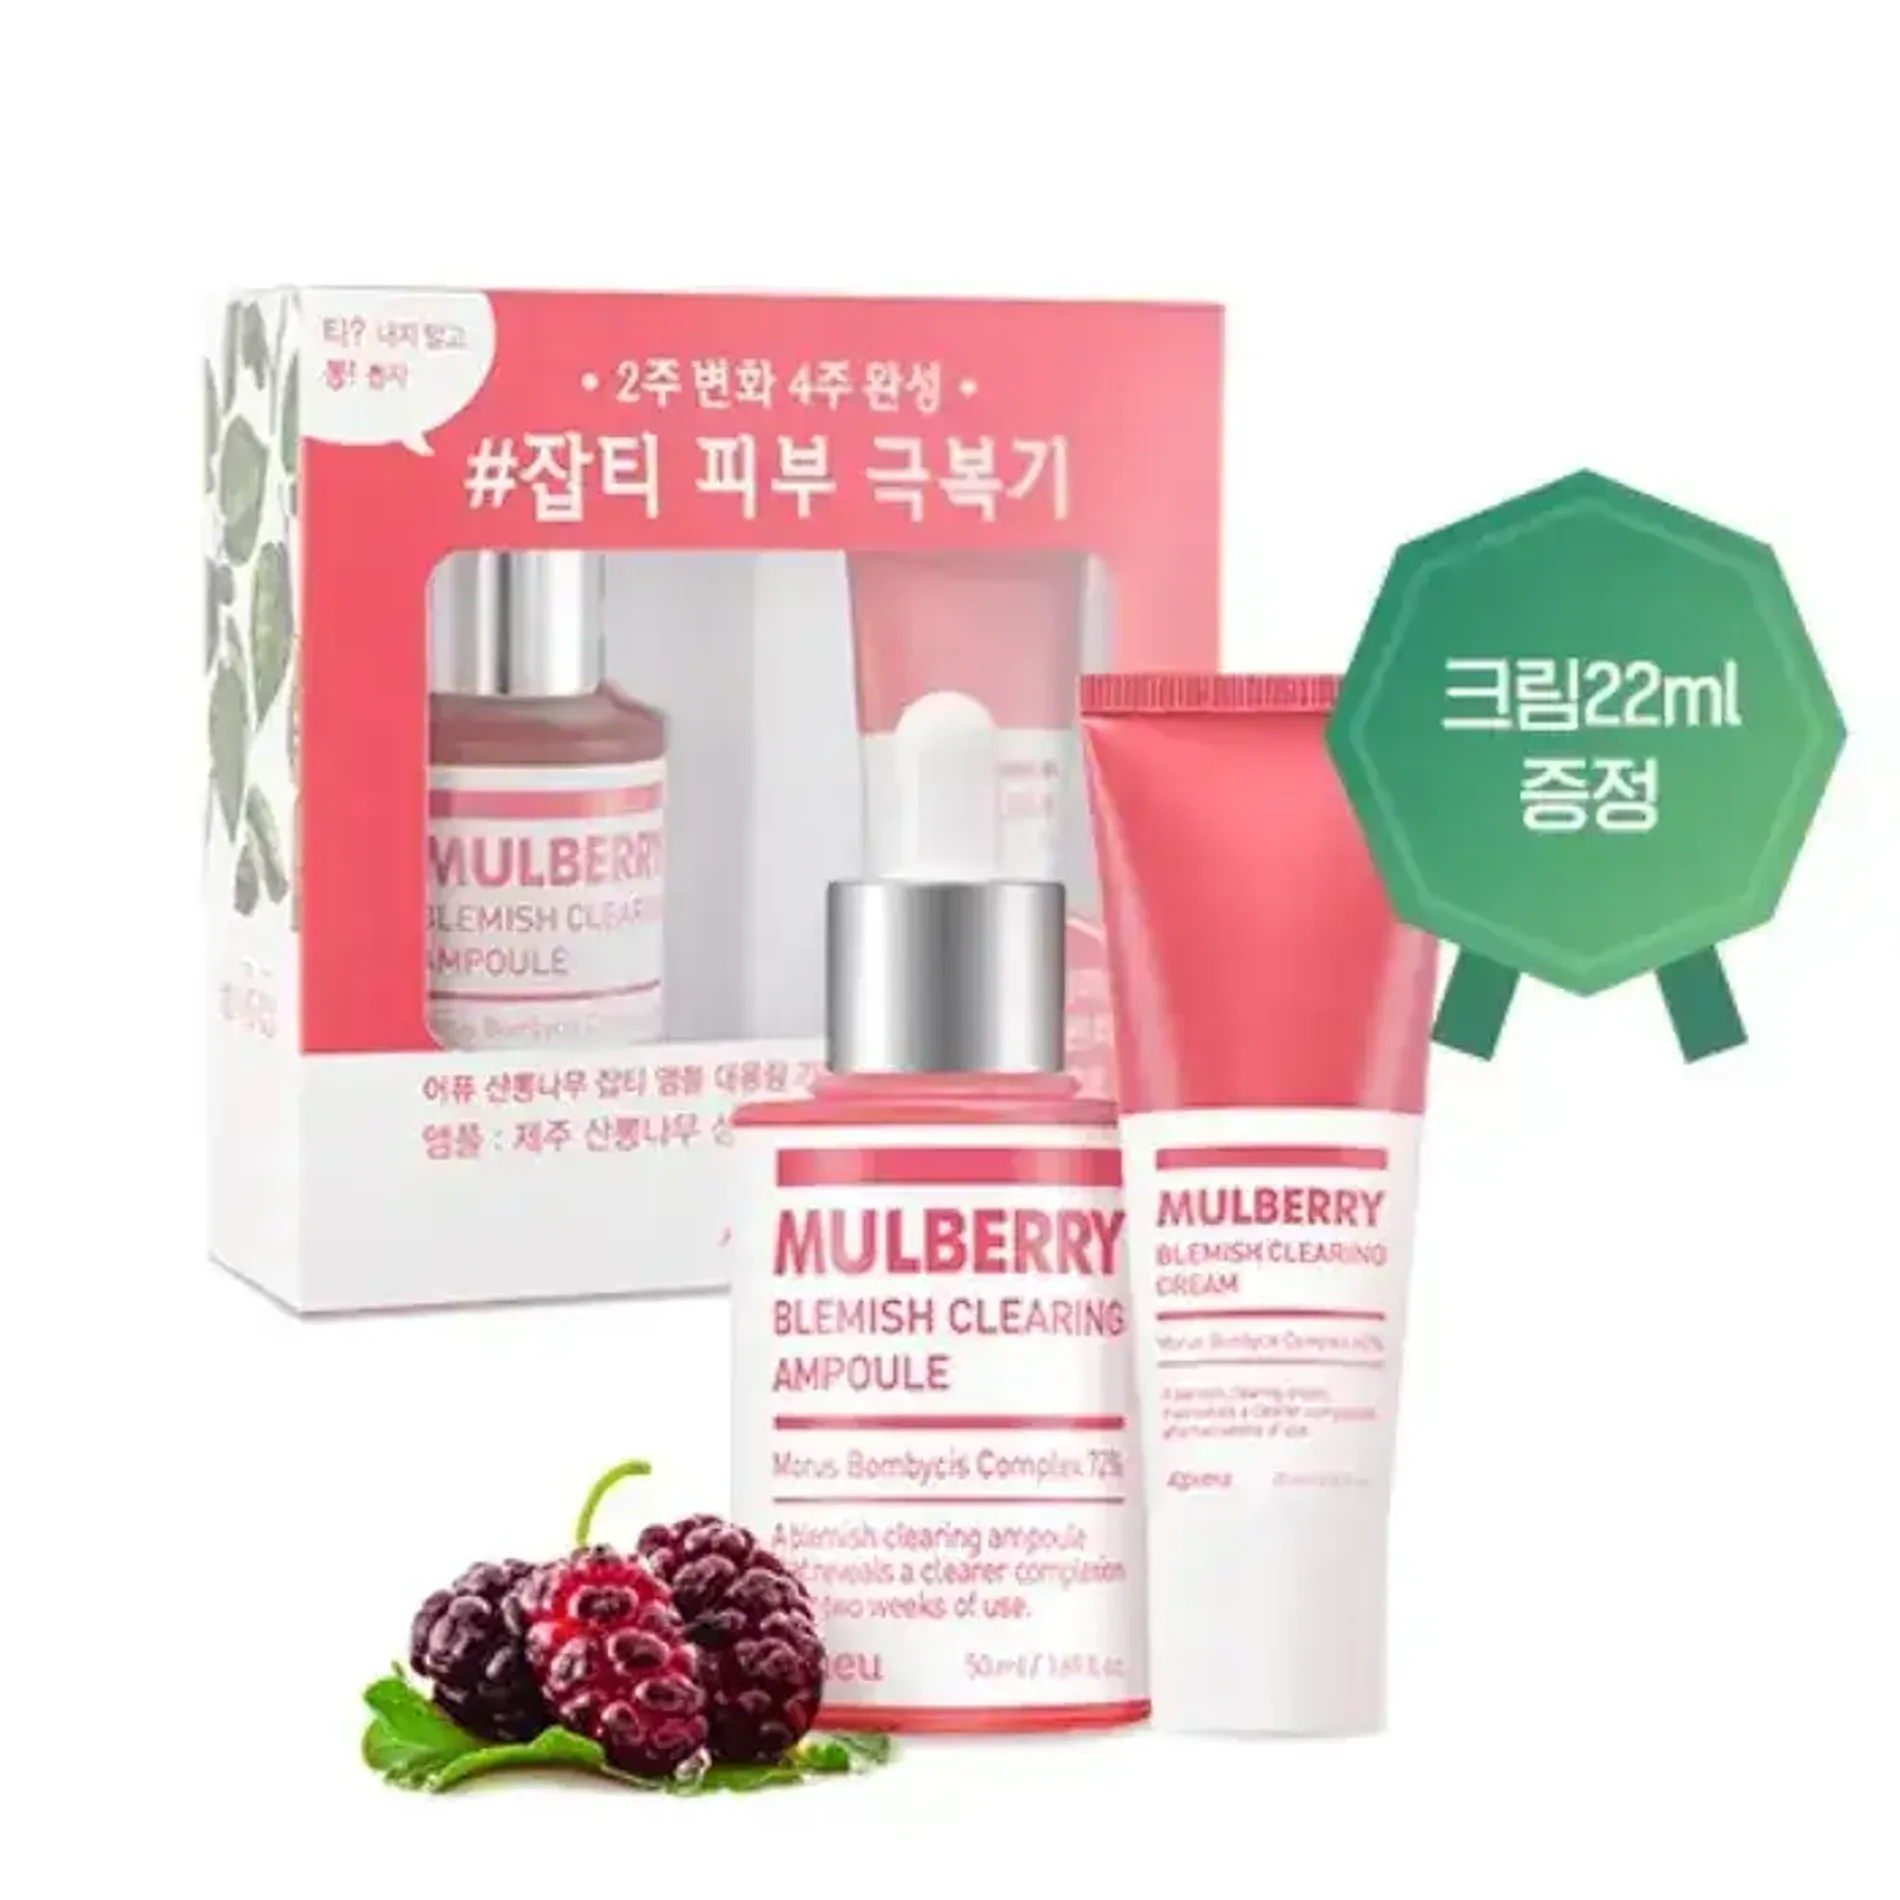 bo-tinh-chat-duong-sang-da-a-pieu-mulberry-blemish-clearing-ampoule-special-set-2pc-1